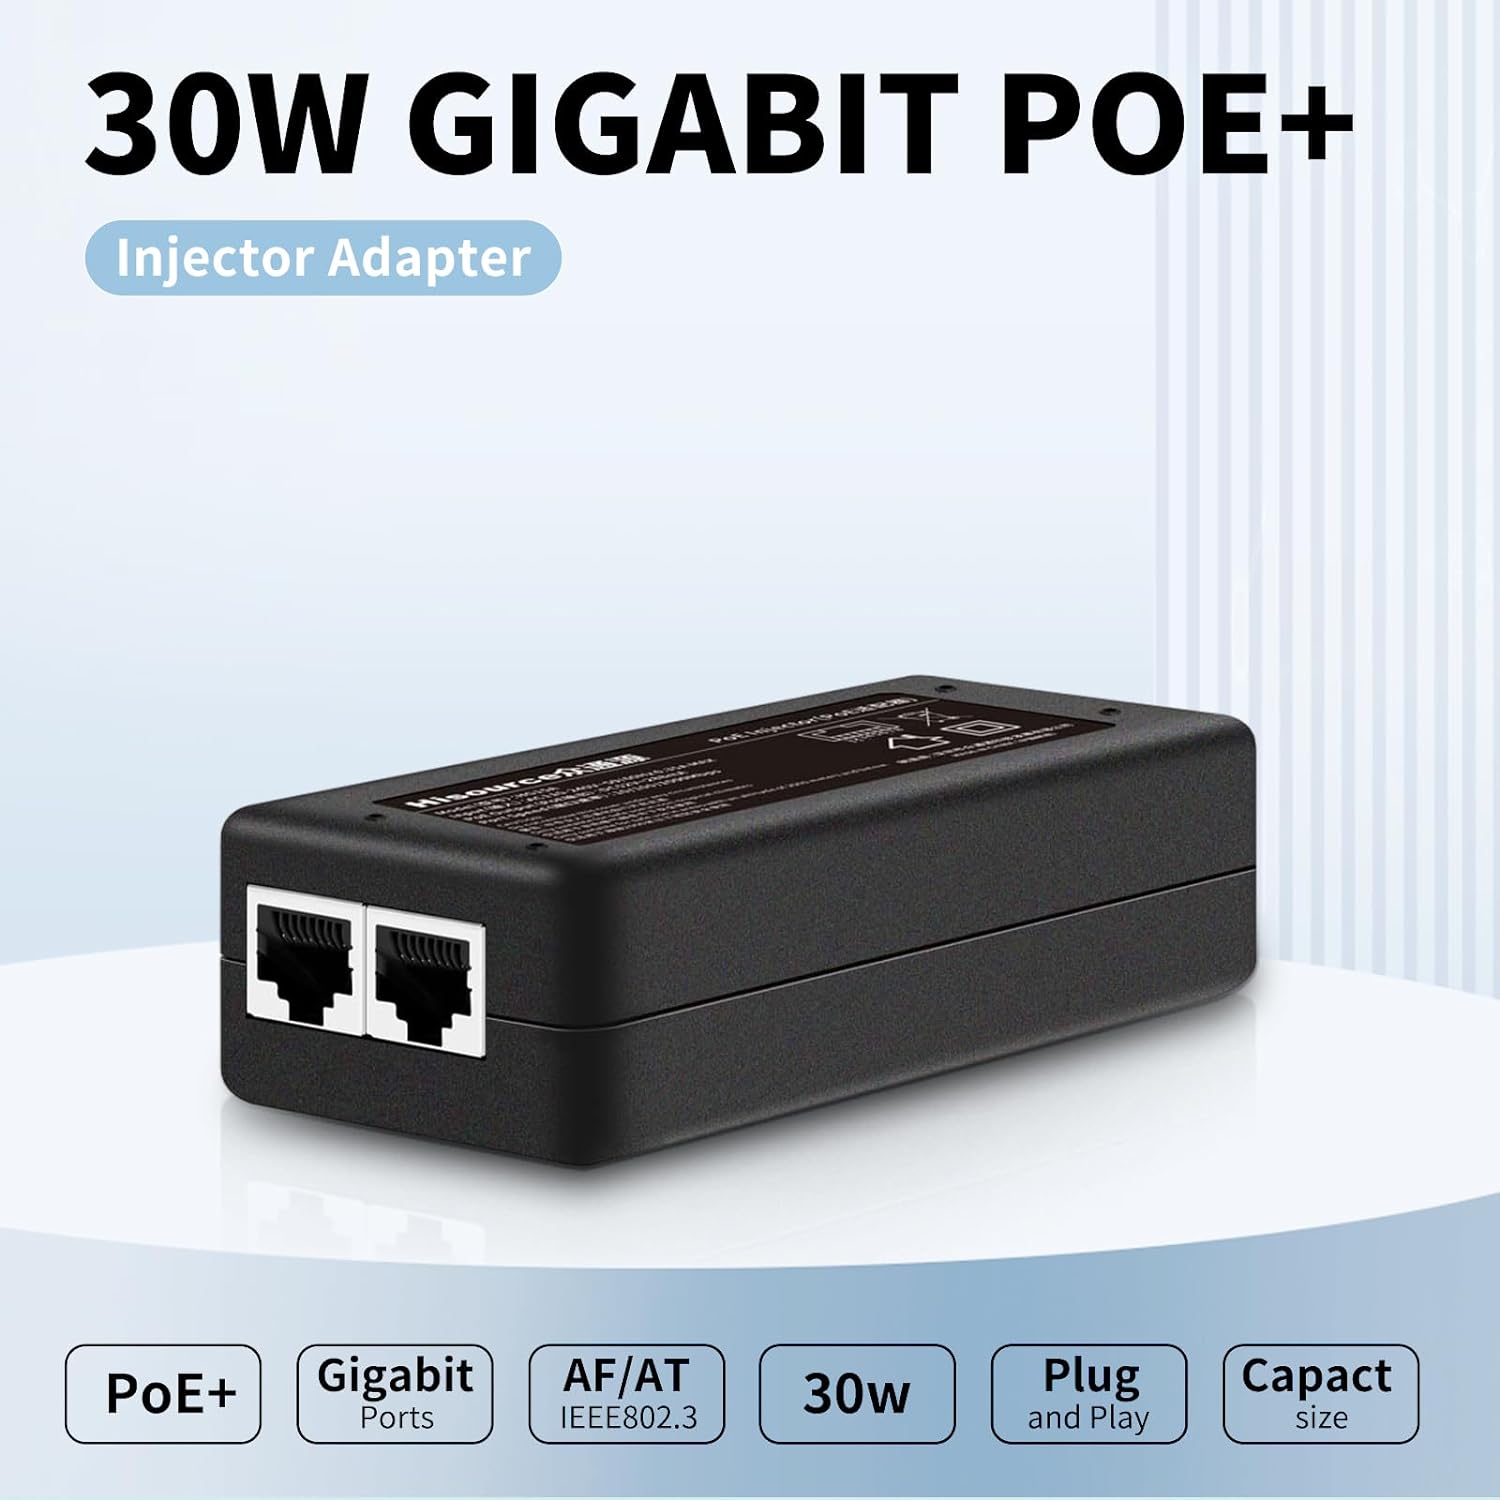 Great Choice Products Poe Injector Up To 30W Power Supply, Gigabit Poe Adapter For Ip Cameras And Voip Phones Network Distance Up To 328 Ft. Poe Po…